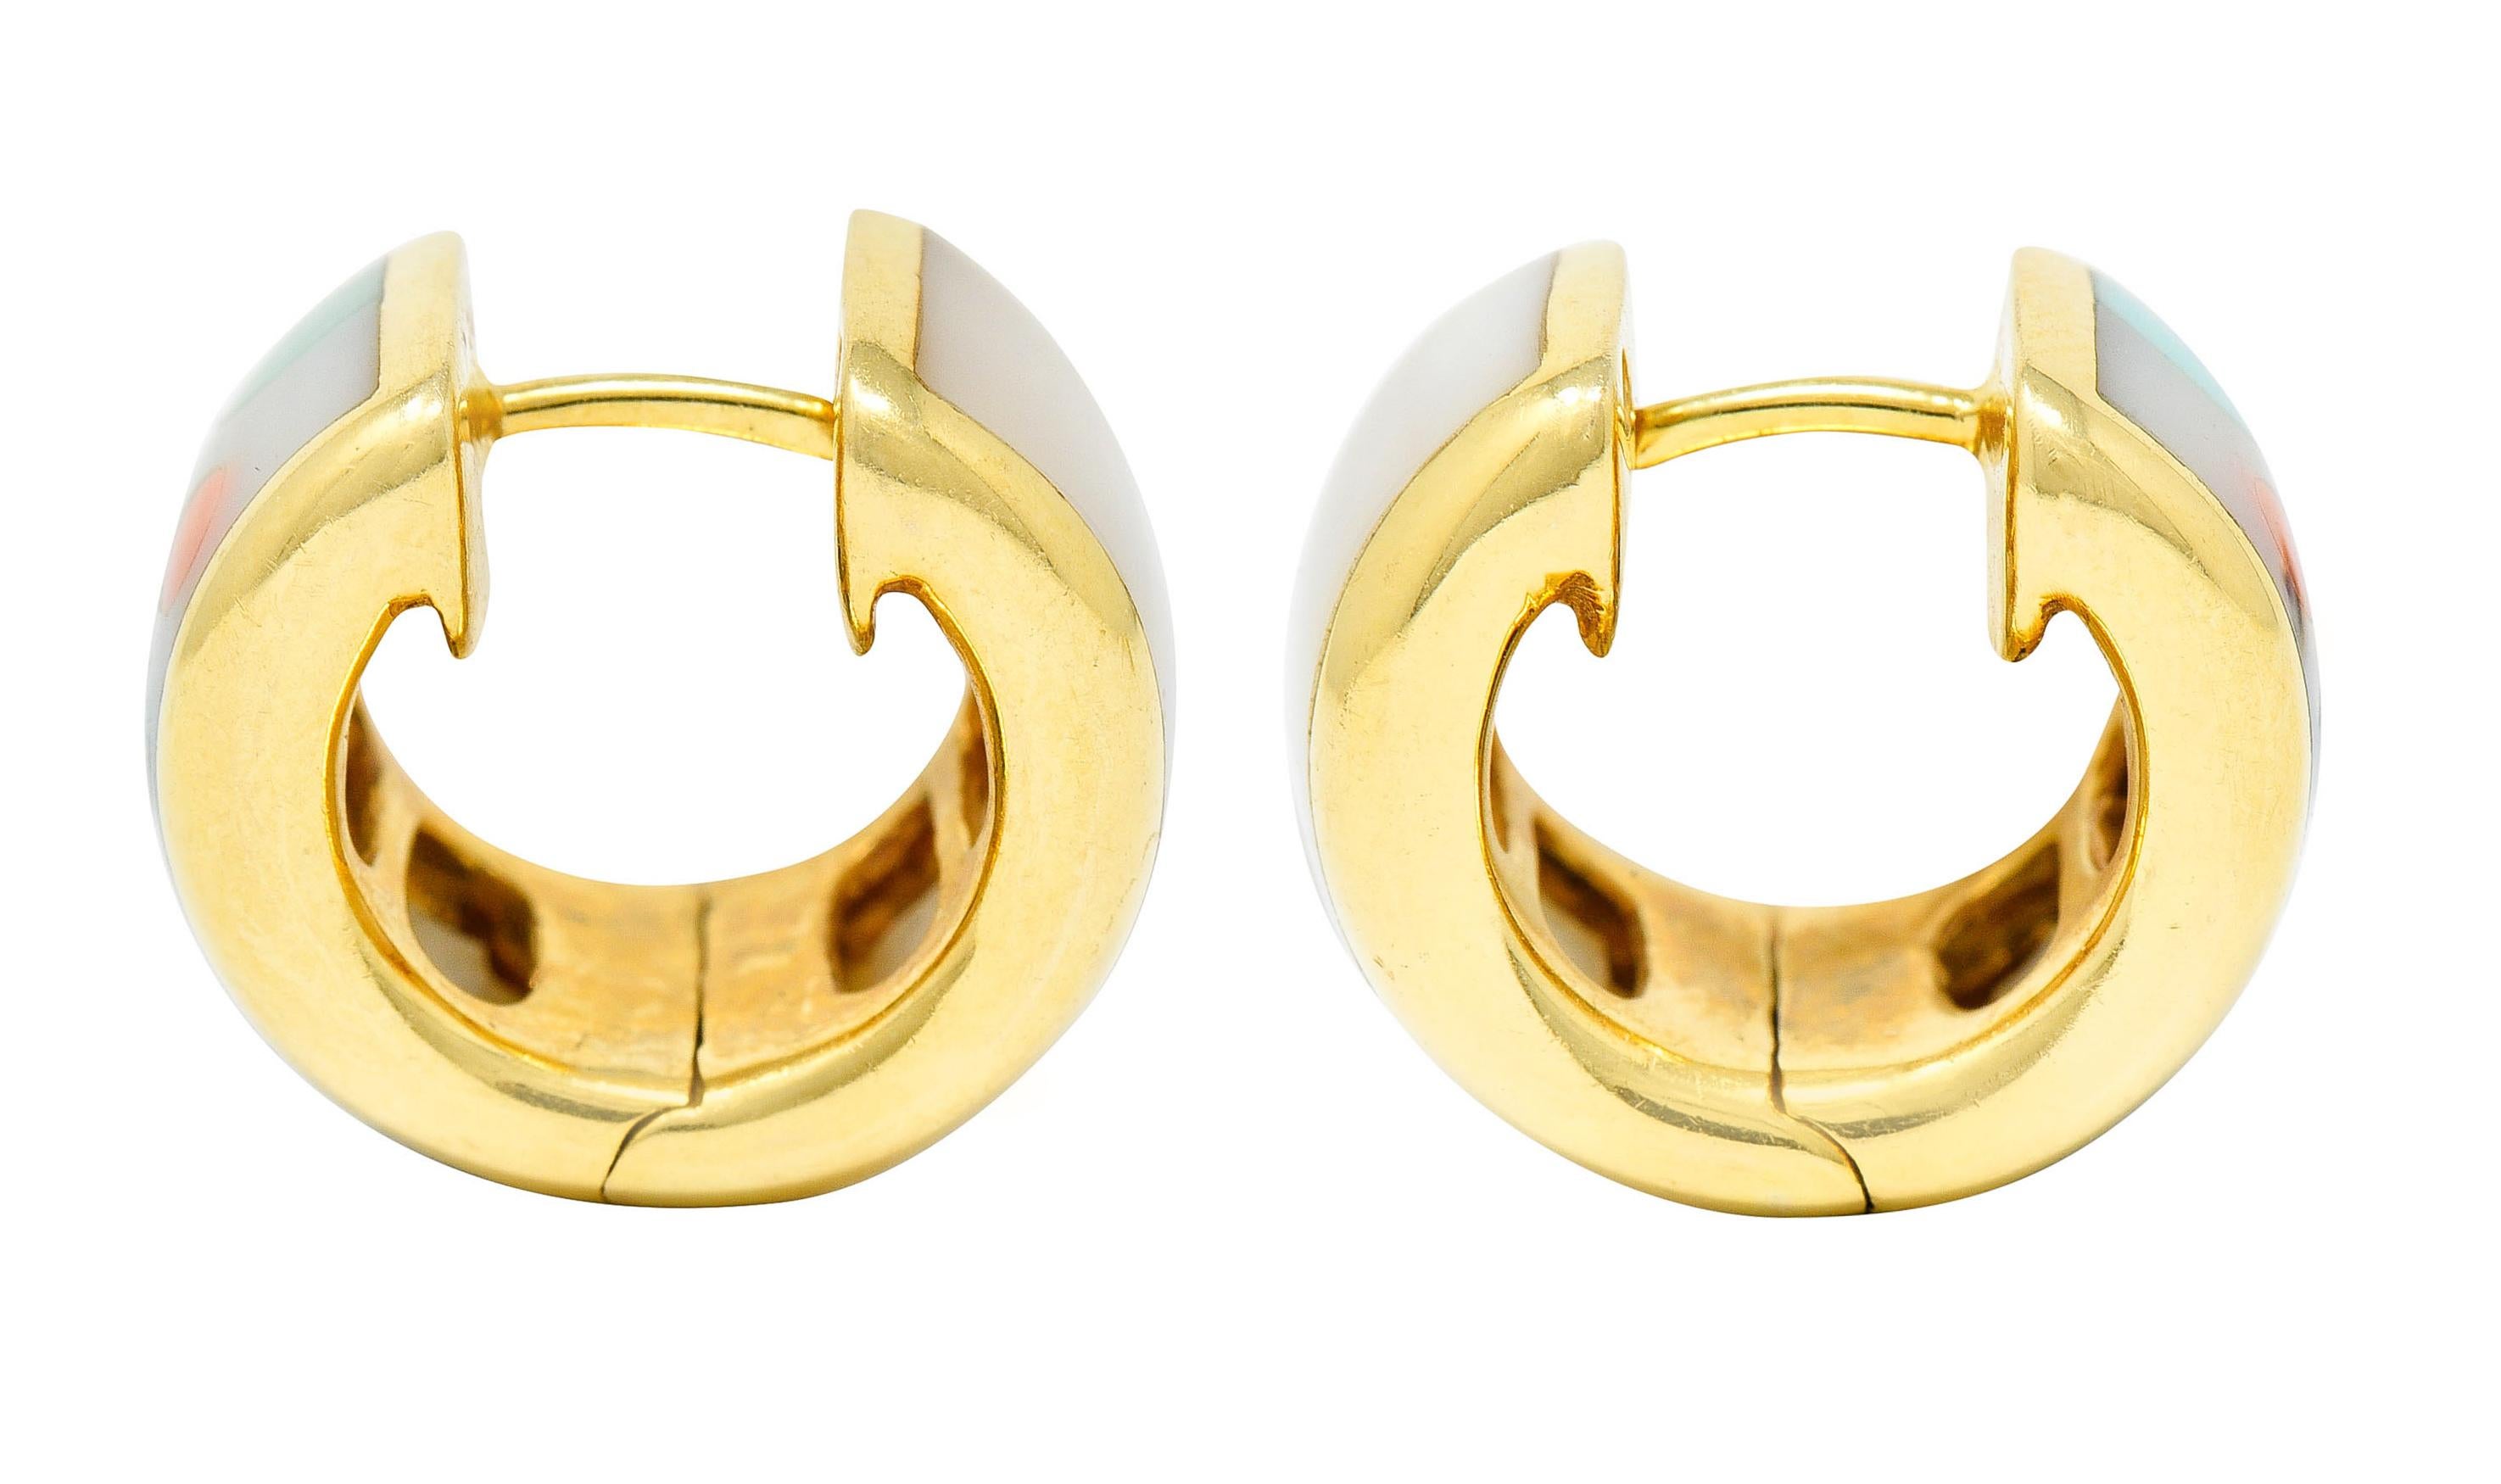 Huggie style earrings feature a polka dot inlay motif

With white mother-of-pearl and circles of lapis, coral, malachite, onyx, and other

Earrings open on a hinge and are completed by posts

Stamped 14K for 14 karat gold

Maker's mark for Asch